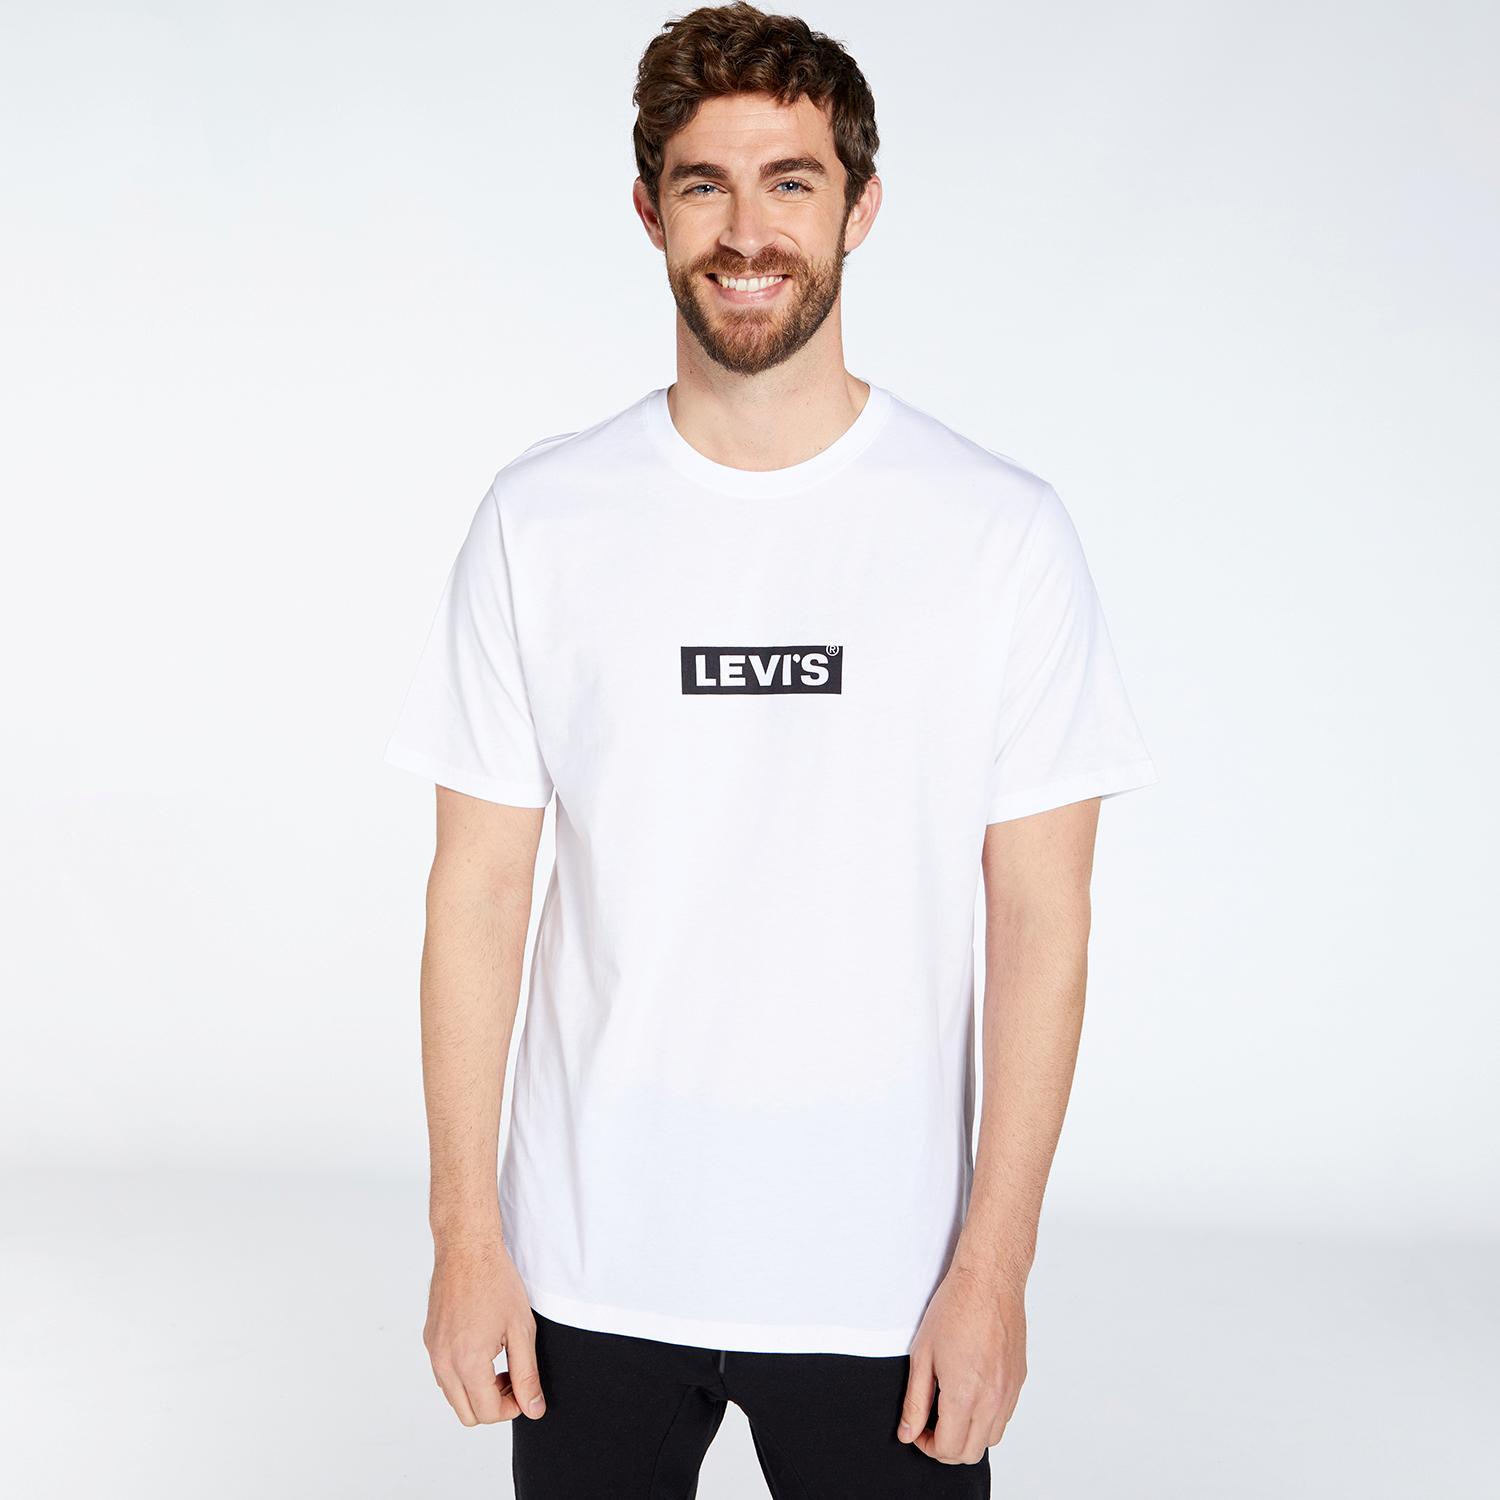 Levis Levi's Relaxed Wit T-shirt Heren